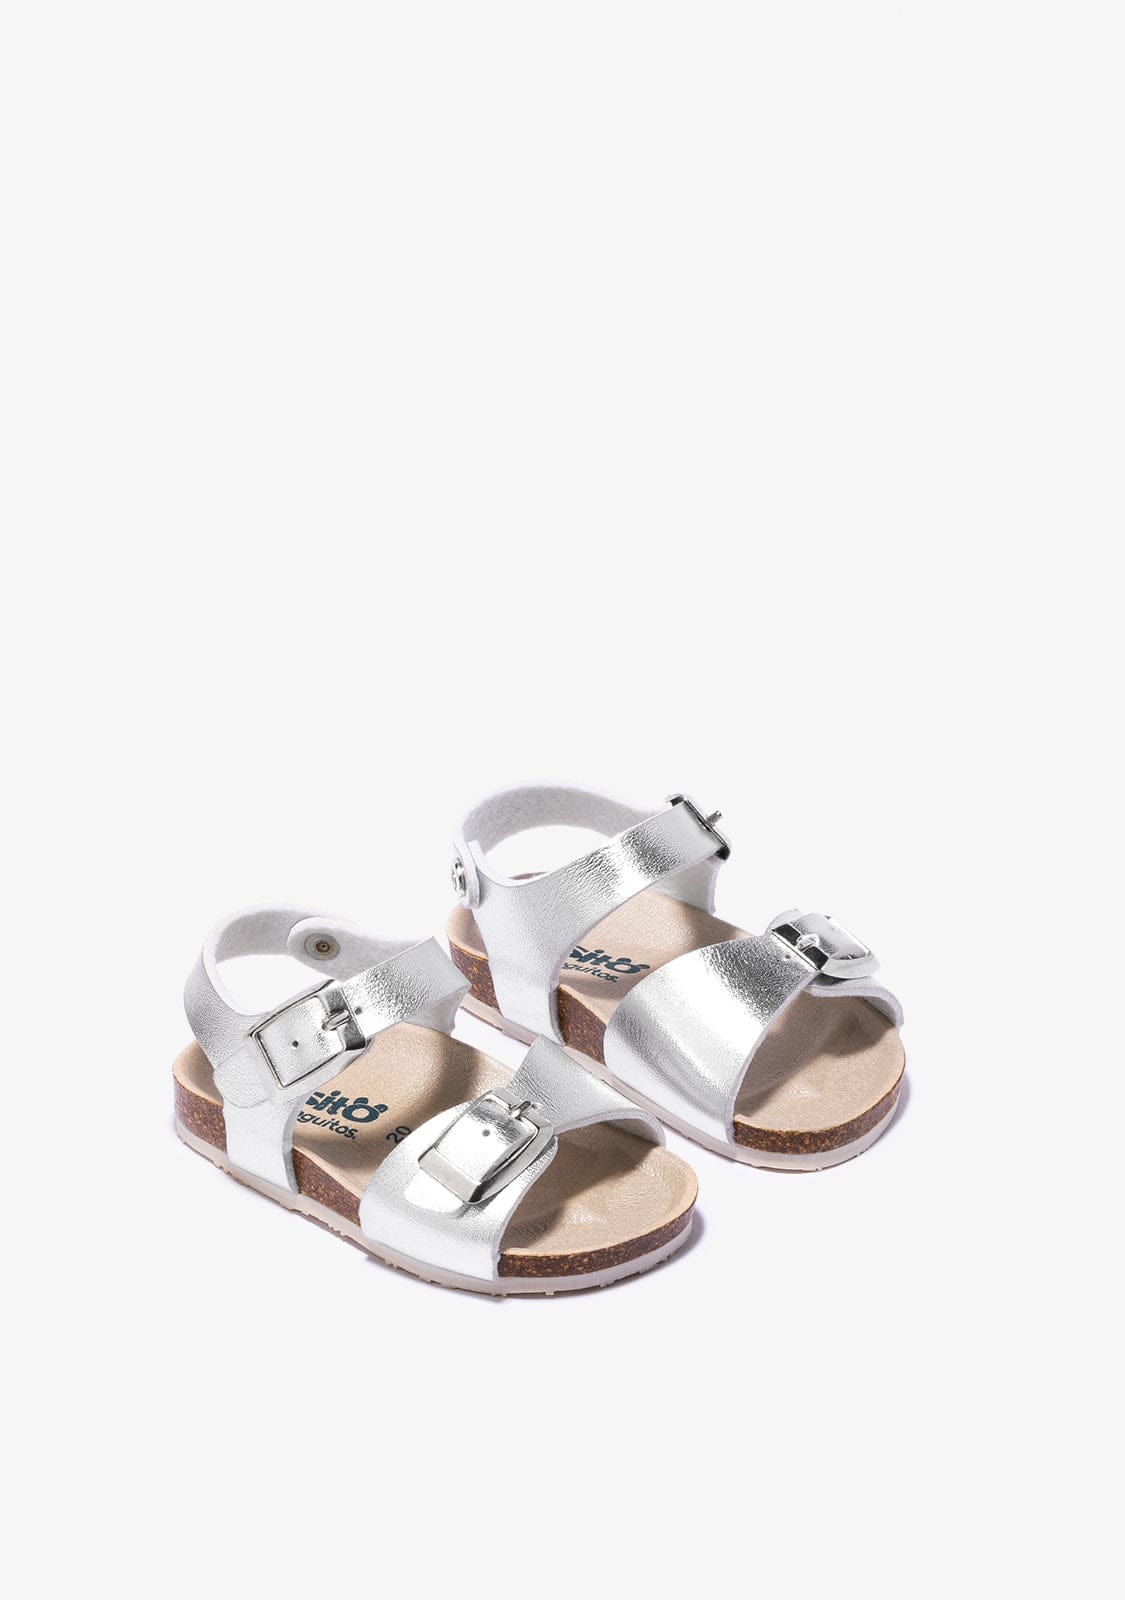 OSITO Shoes Baby's Silver Bio Sandals Metallized